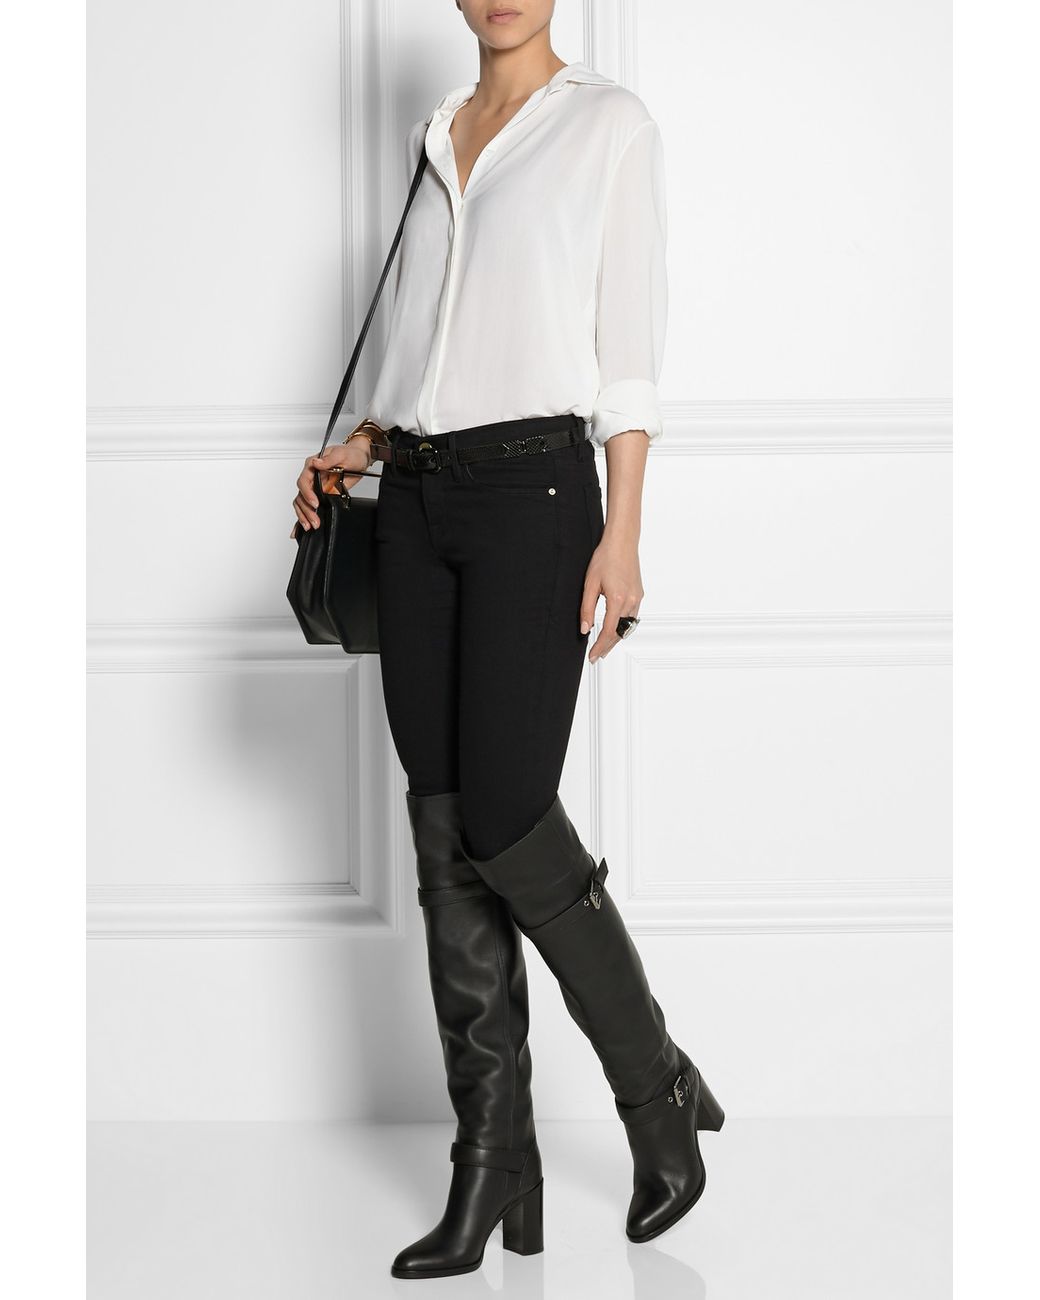 Gianvito Rossi Leather Over-The-Knee Boots in Black | Lyst